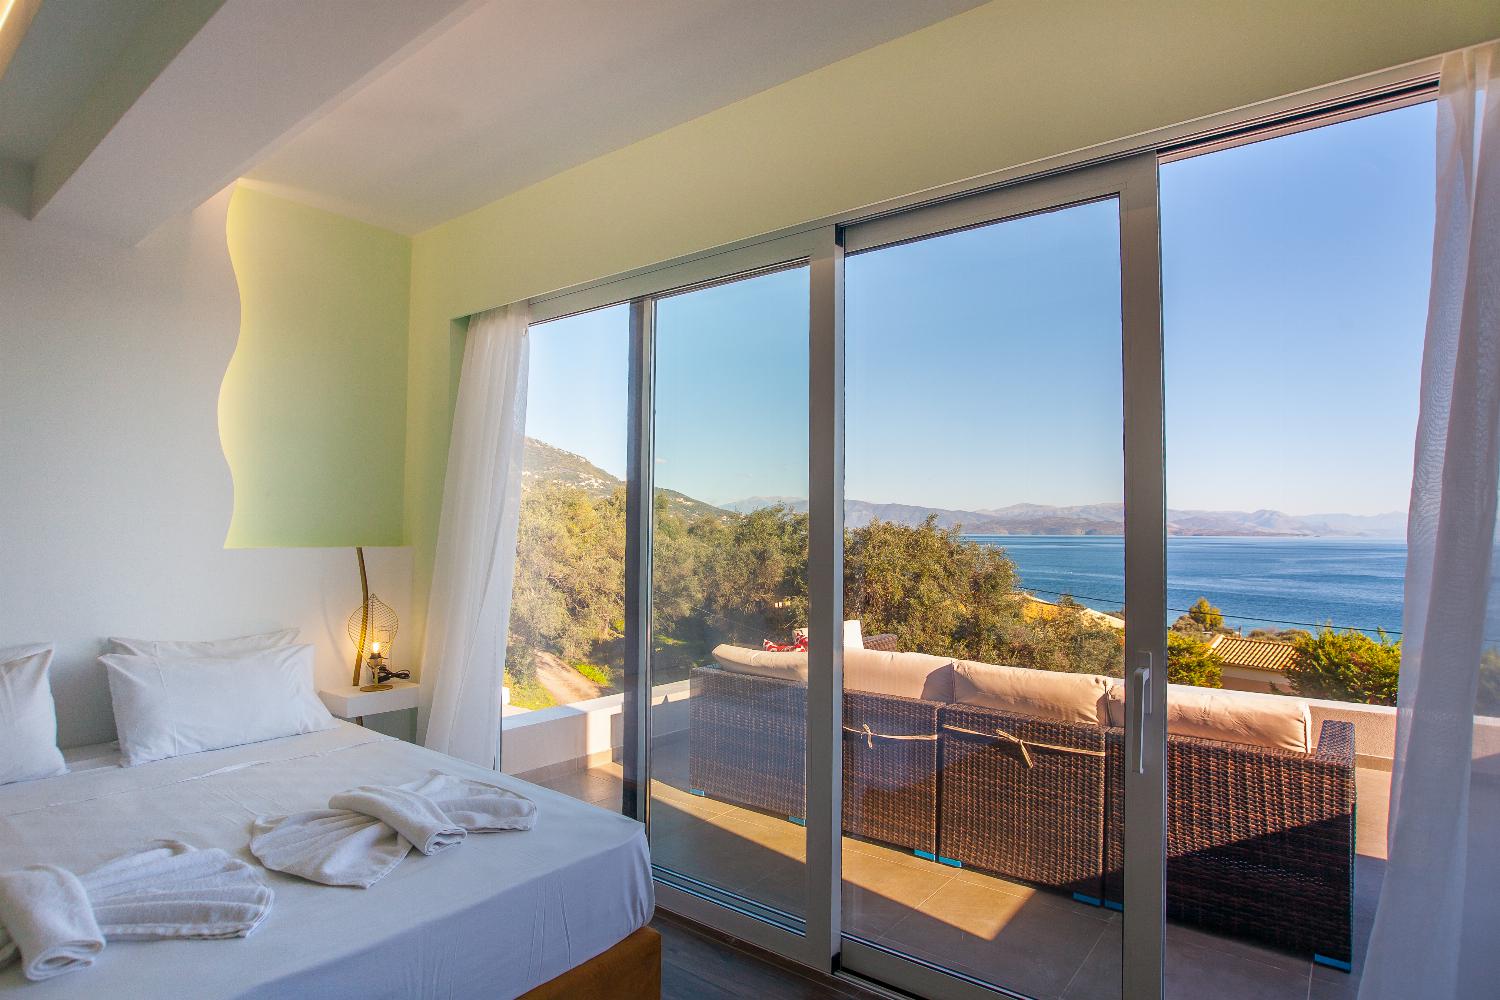 Double bedroom with en suite bathroom, A/C, and balcony access with panoramic sea views